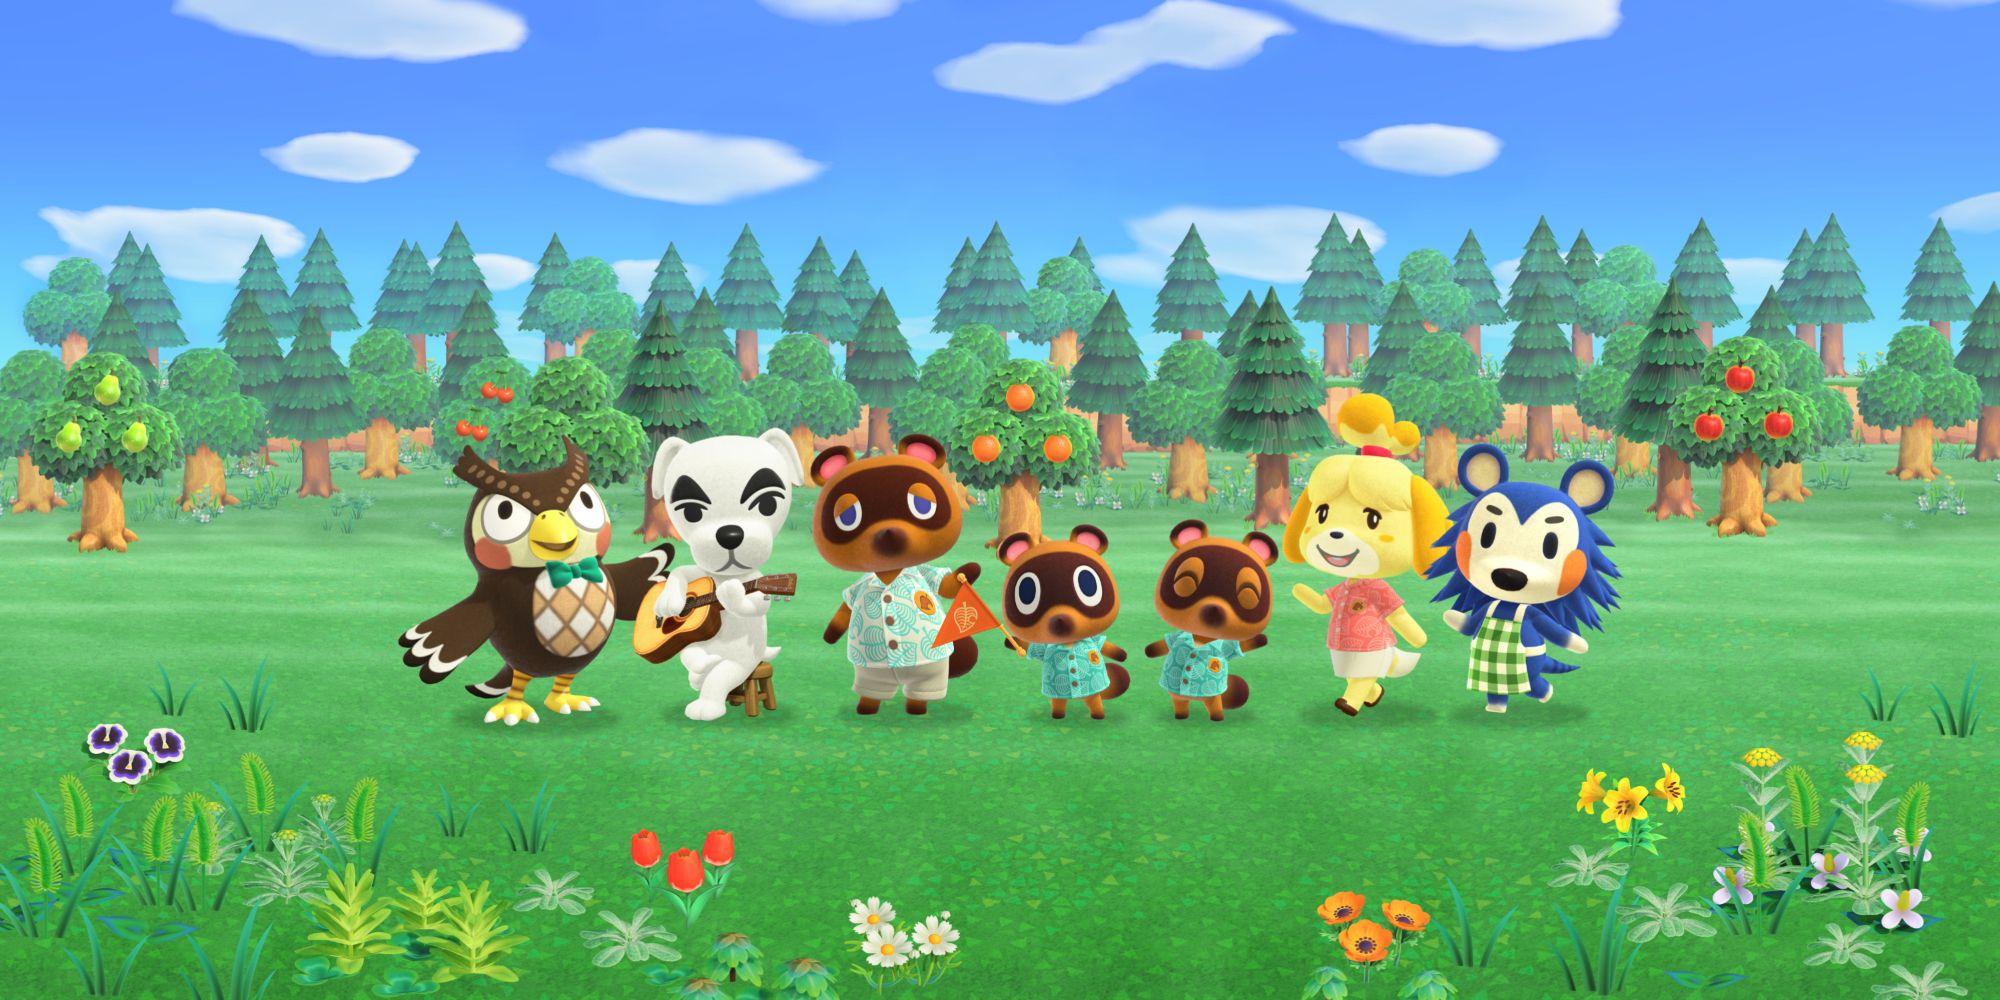 Animal Crossing Core Characters Blathers, KK Slider, Tom Nook, Timmy and Tommy, Isabelle, and Sable